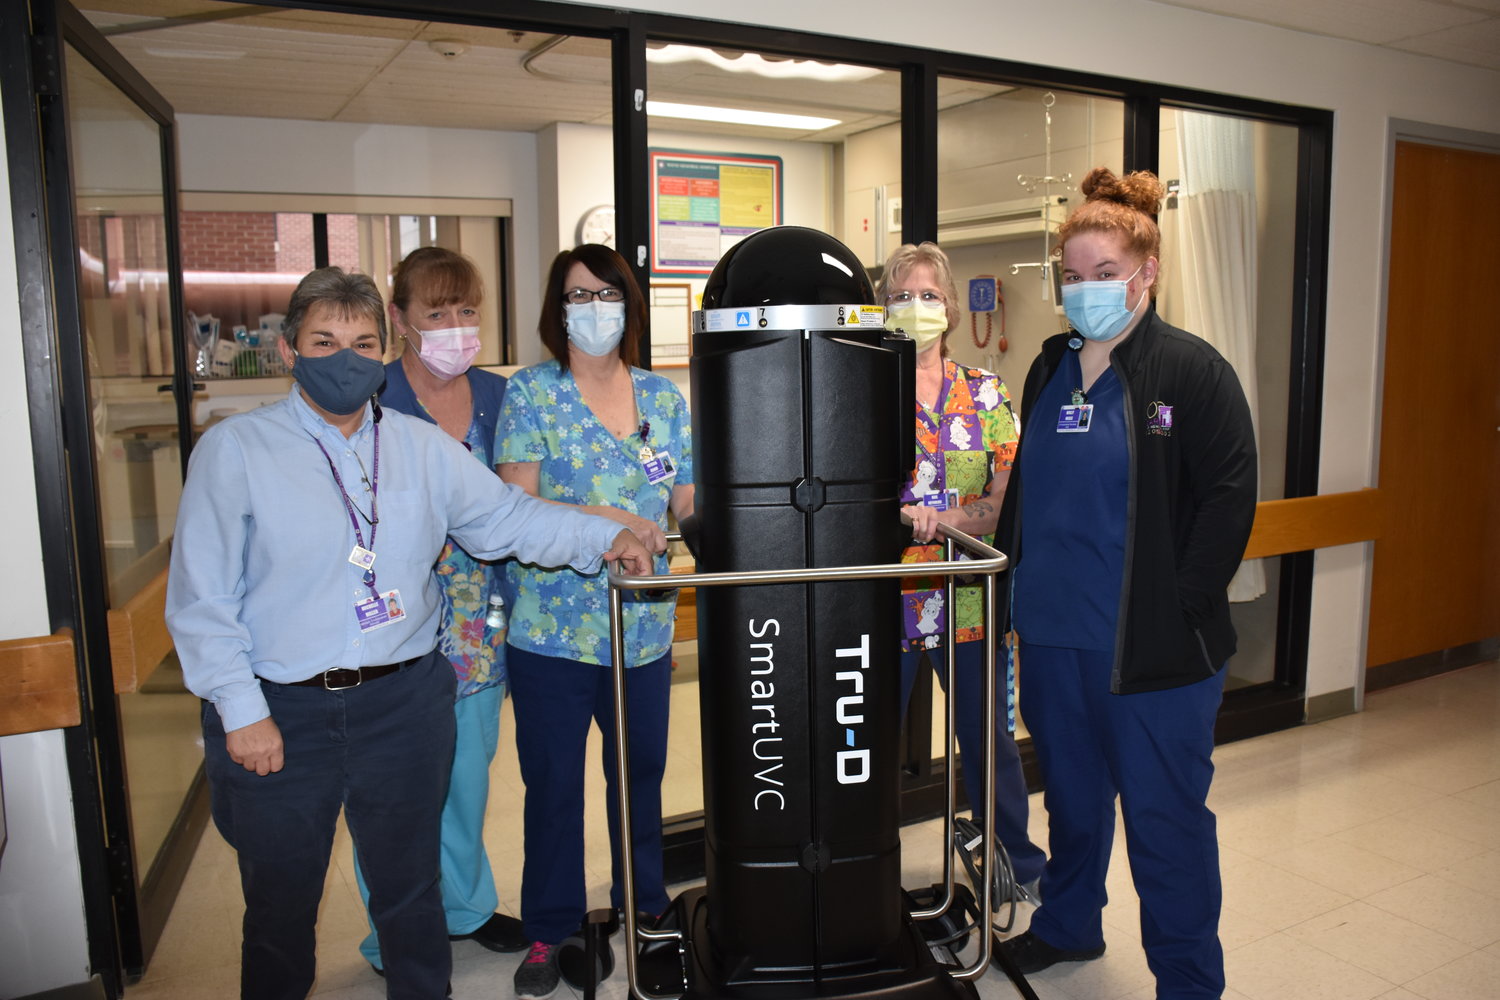 Environmental Services staff Michelle Miller, left, Mary Moser, Patricia Reahm, Gail Reynolds and Molly Nagle with Tru-D Smart UVC robot in the Intensive Care Unit.